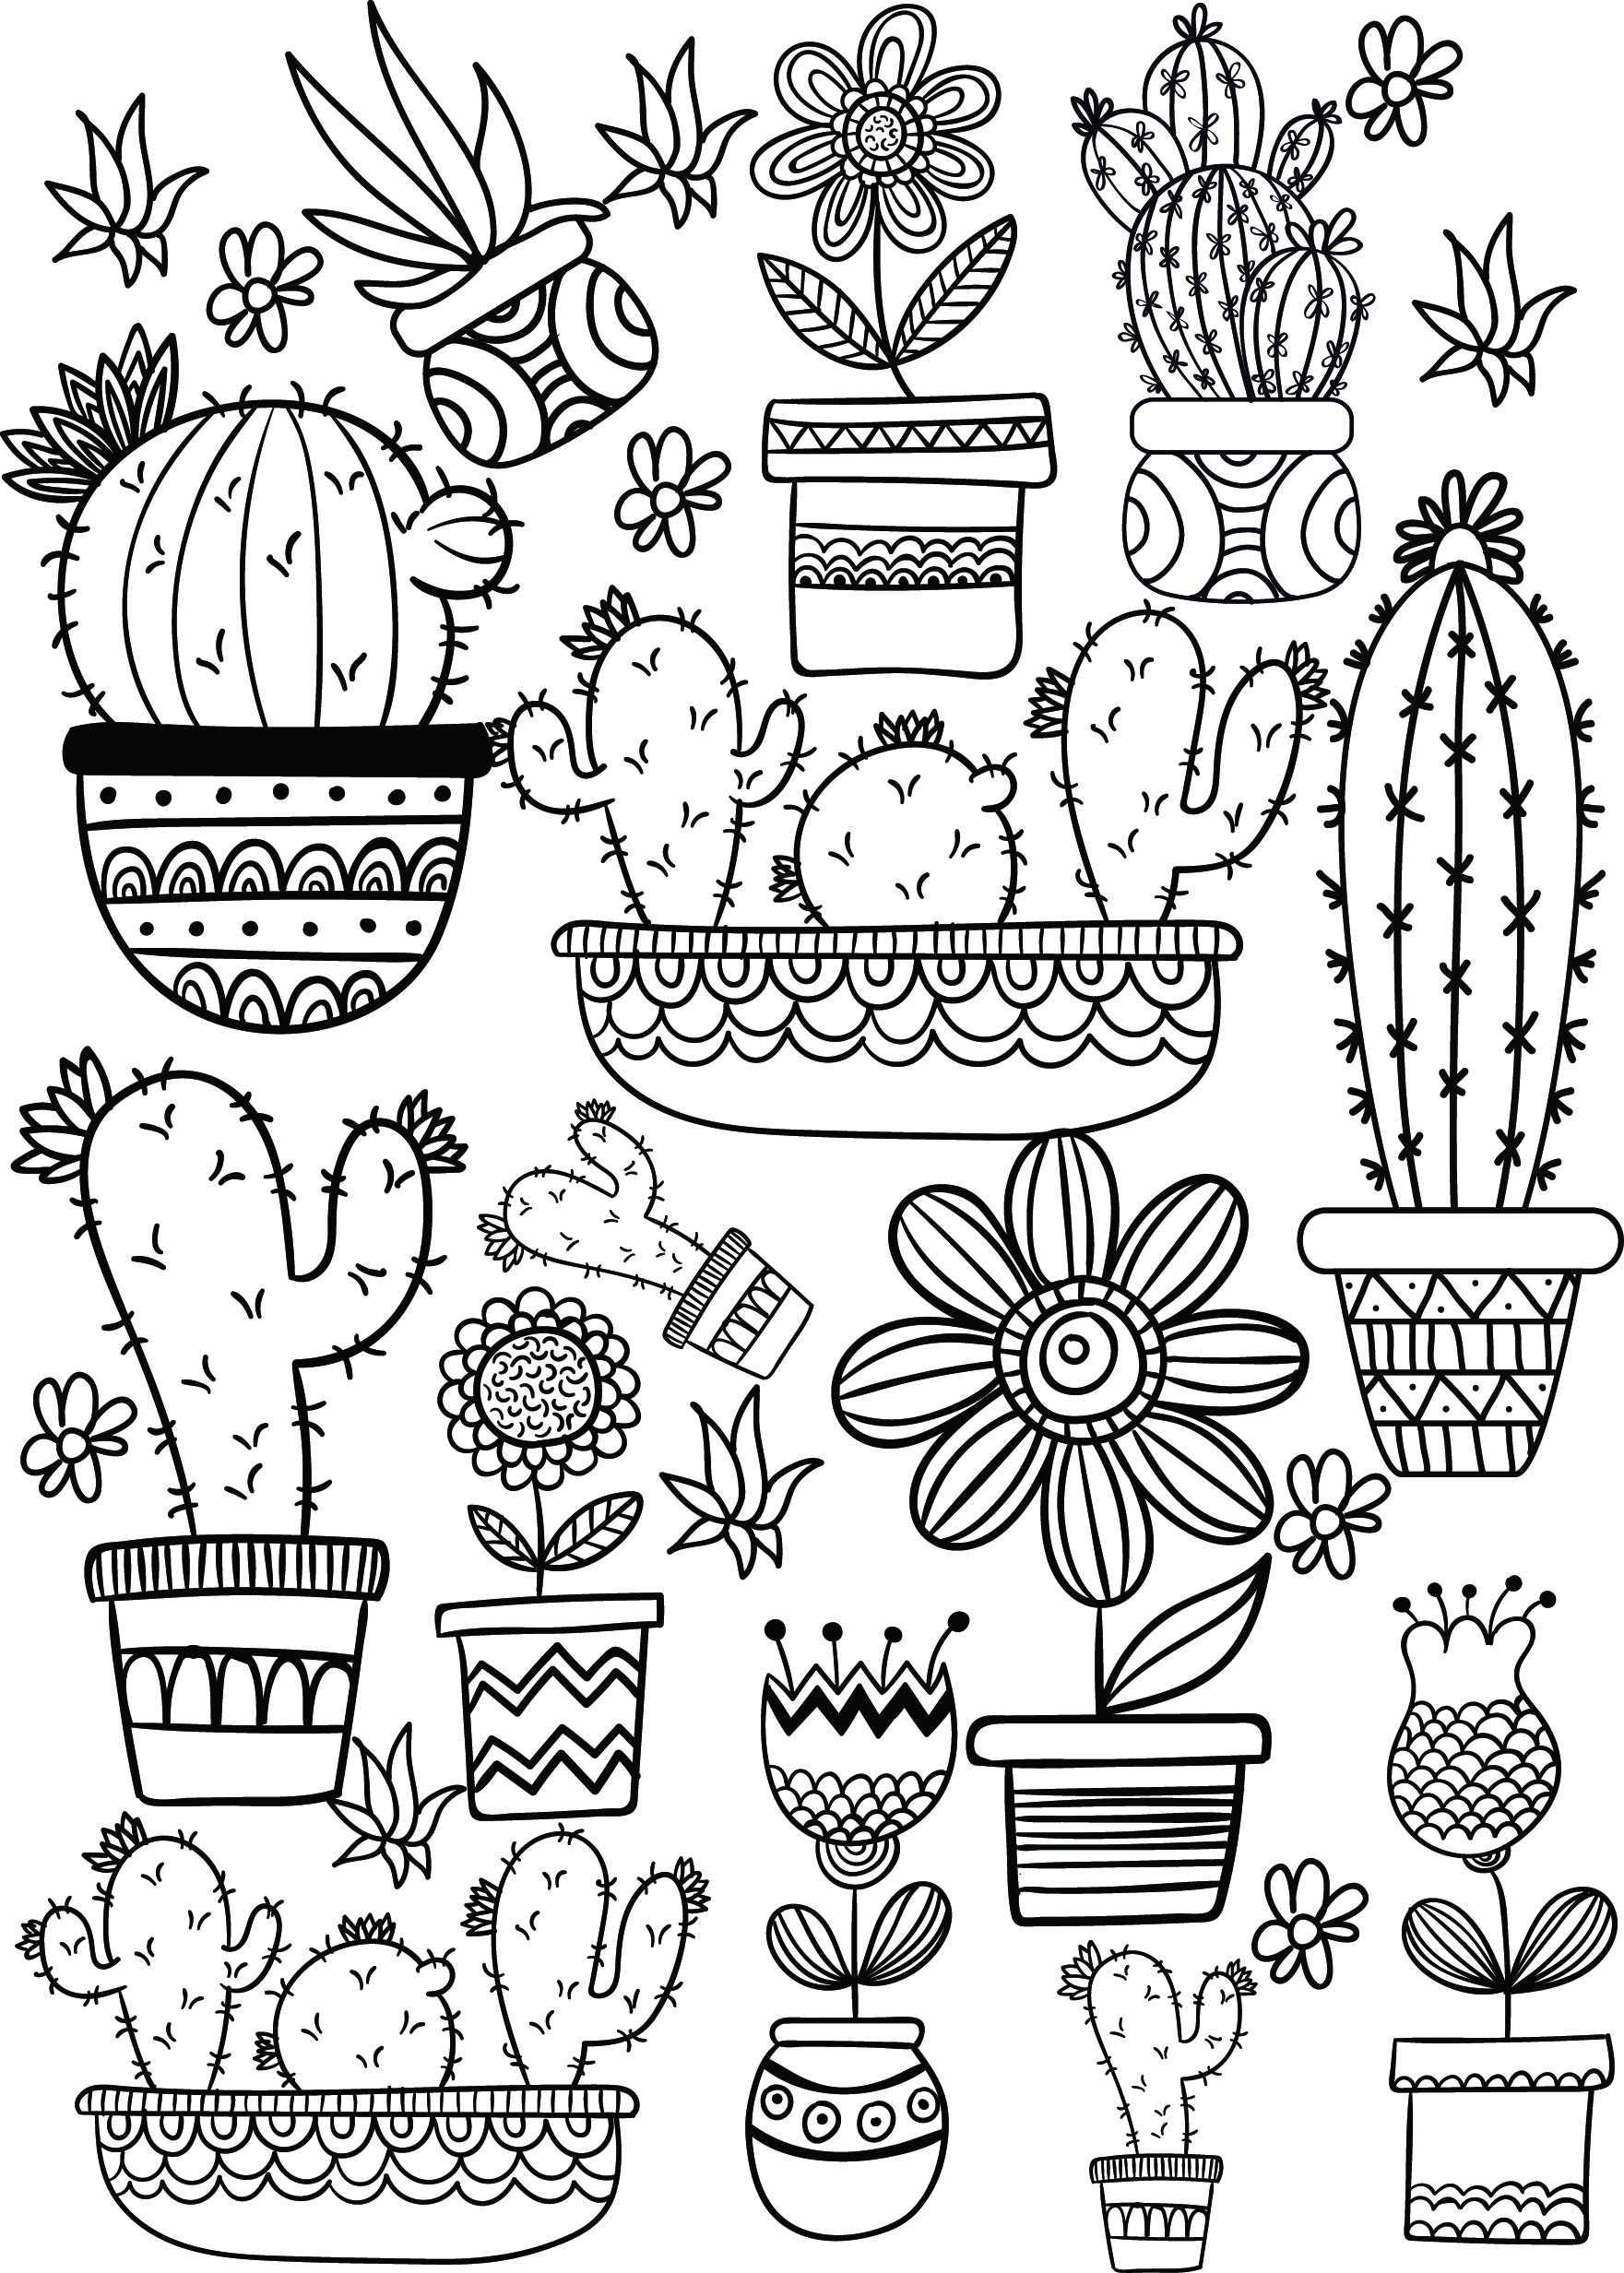 21 Ideas for Free Printable Cactus Coloring Pages - Home, Family, Style ...